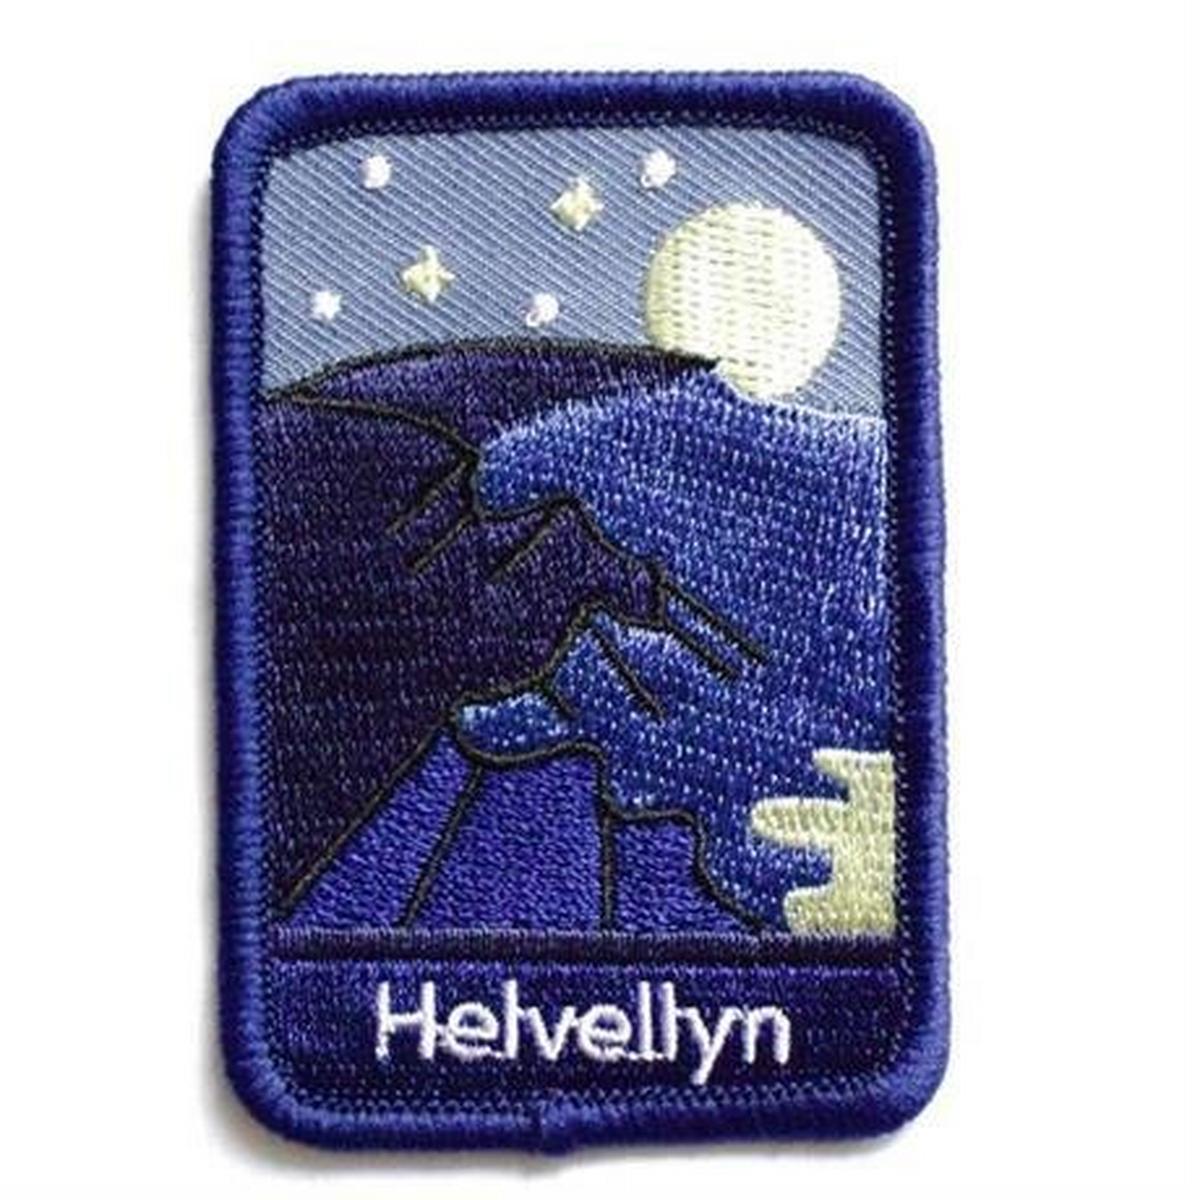 Conquer Lake District Patch - Helvellyn